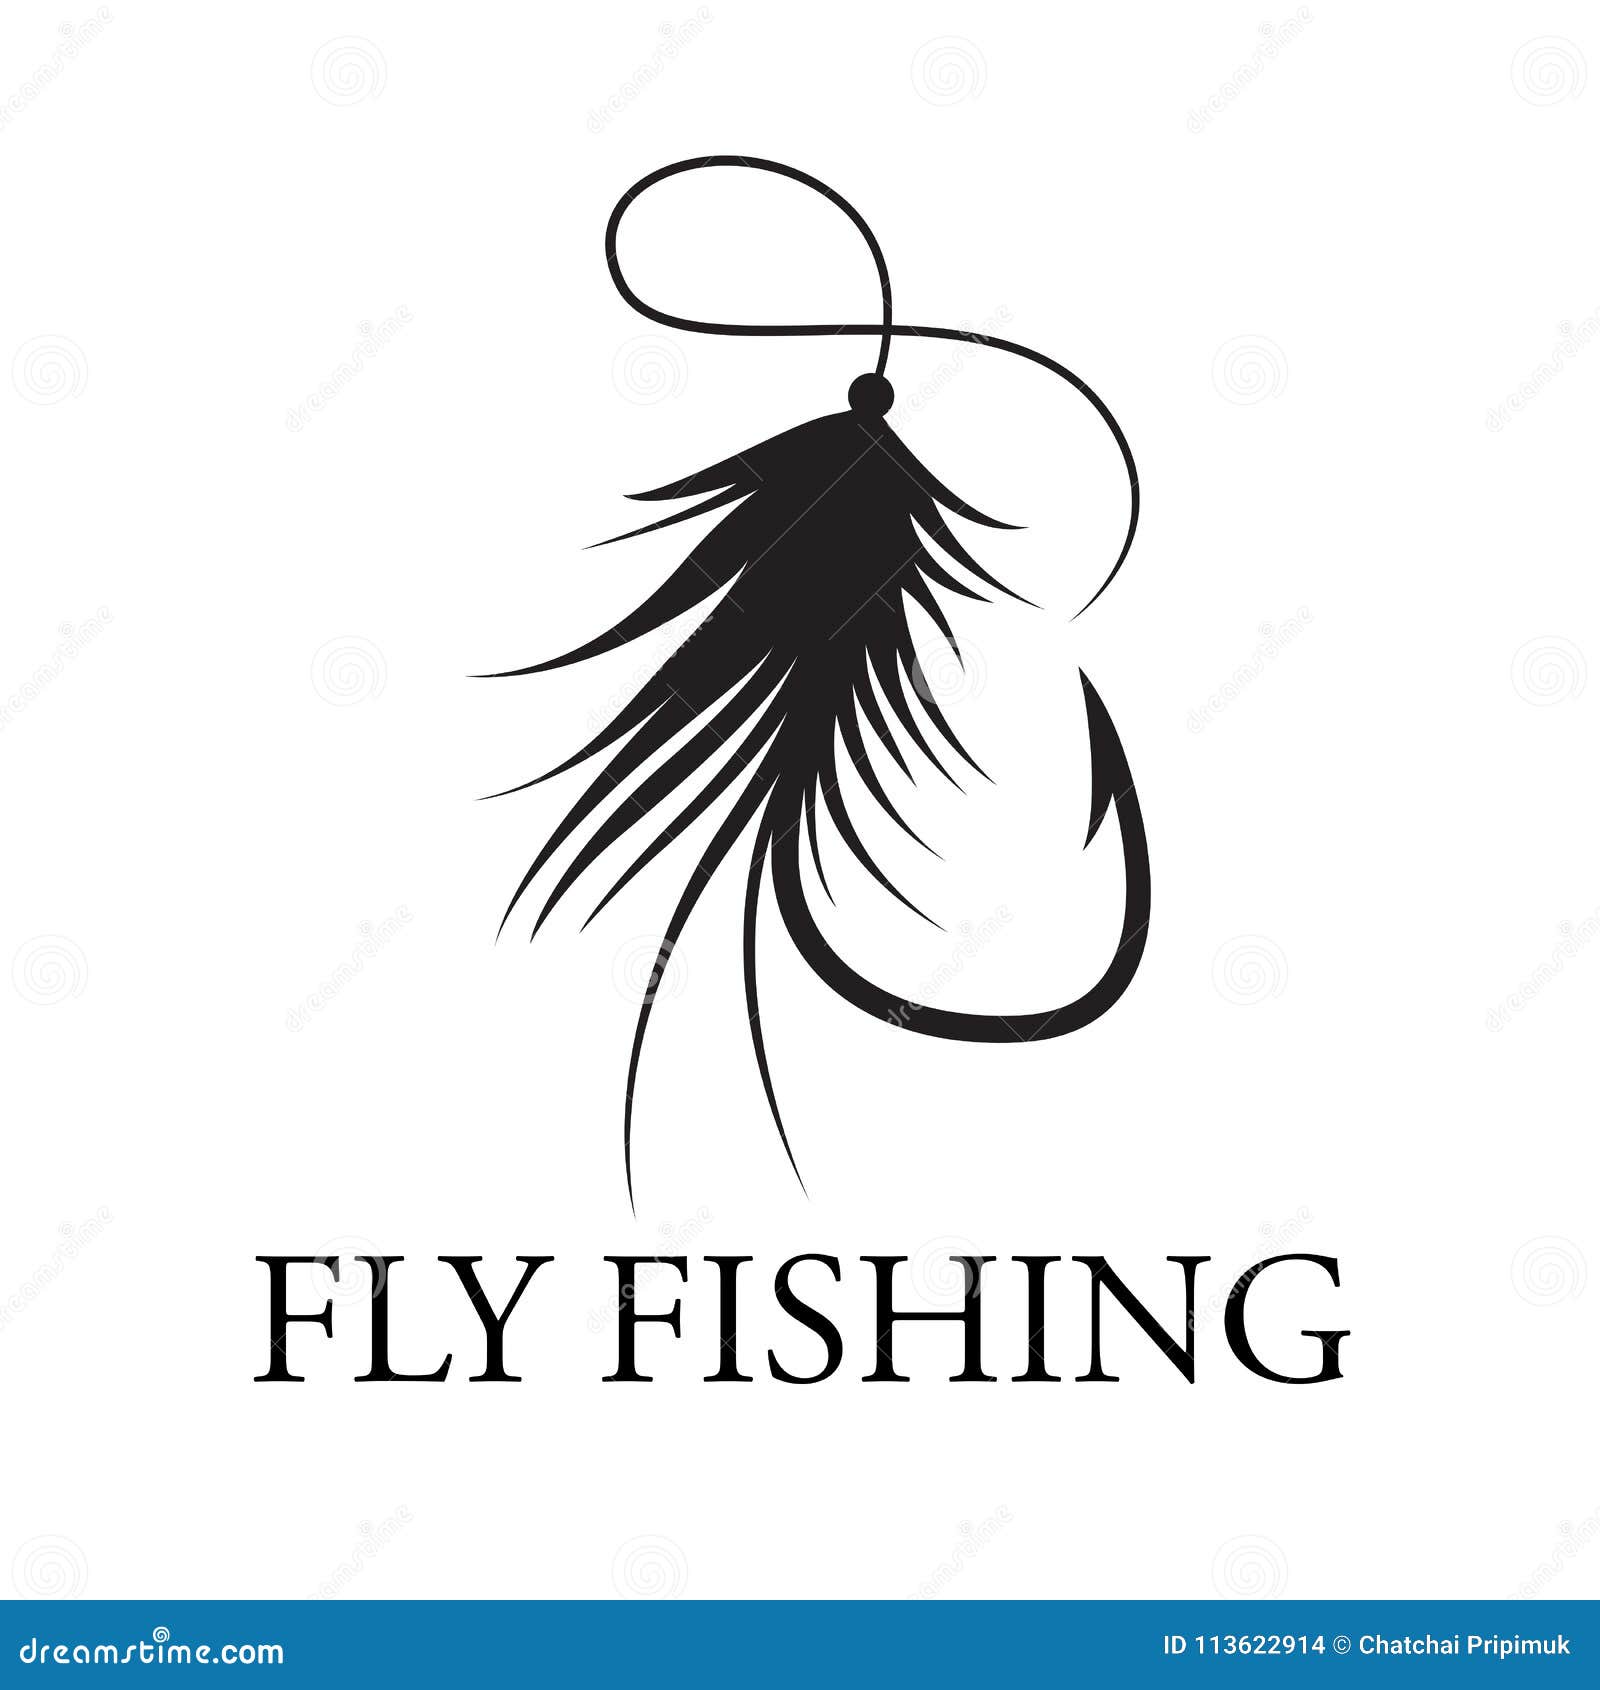 Graphic Fly Fishing, Vector Stock Vector - Illustration of graphic, tattoo:  113622914